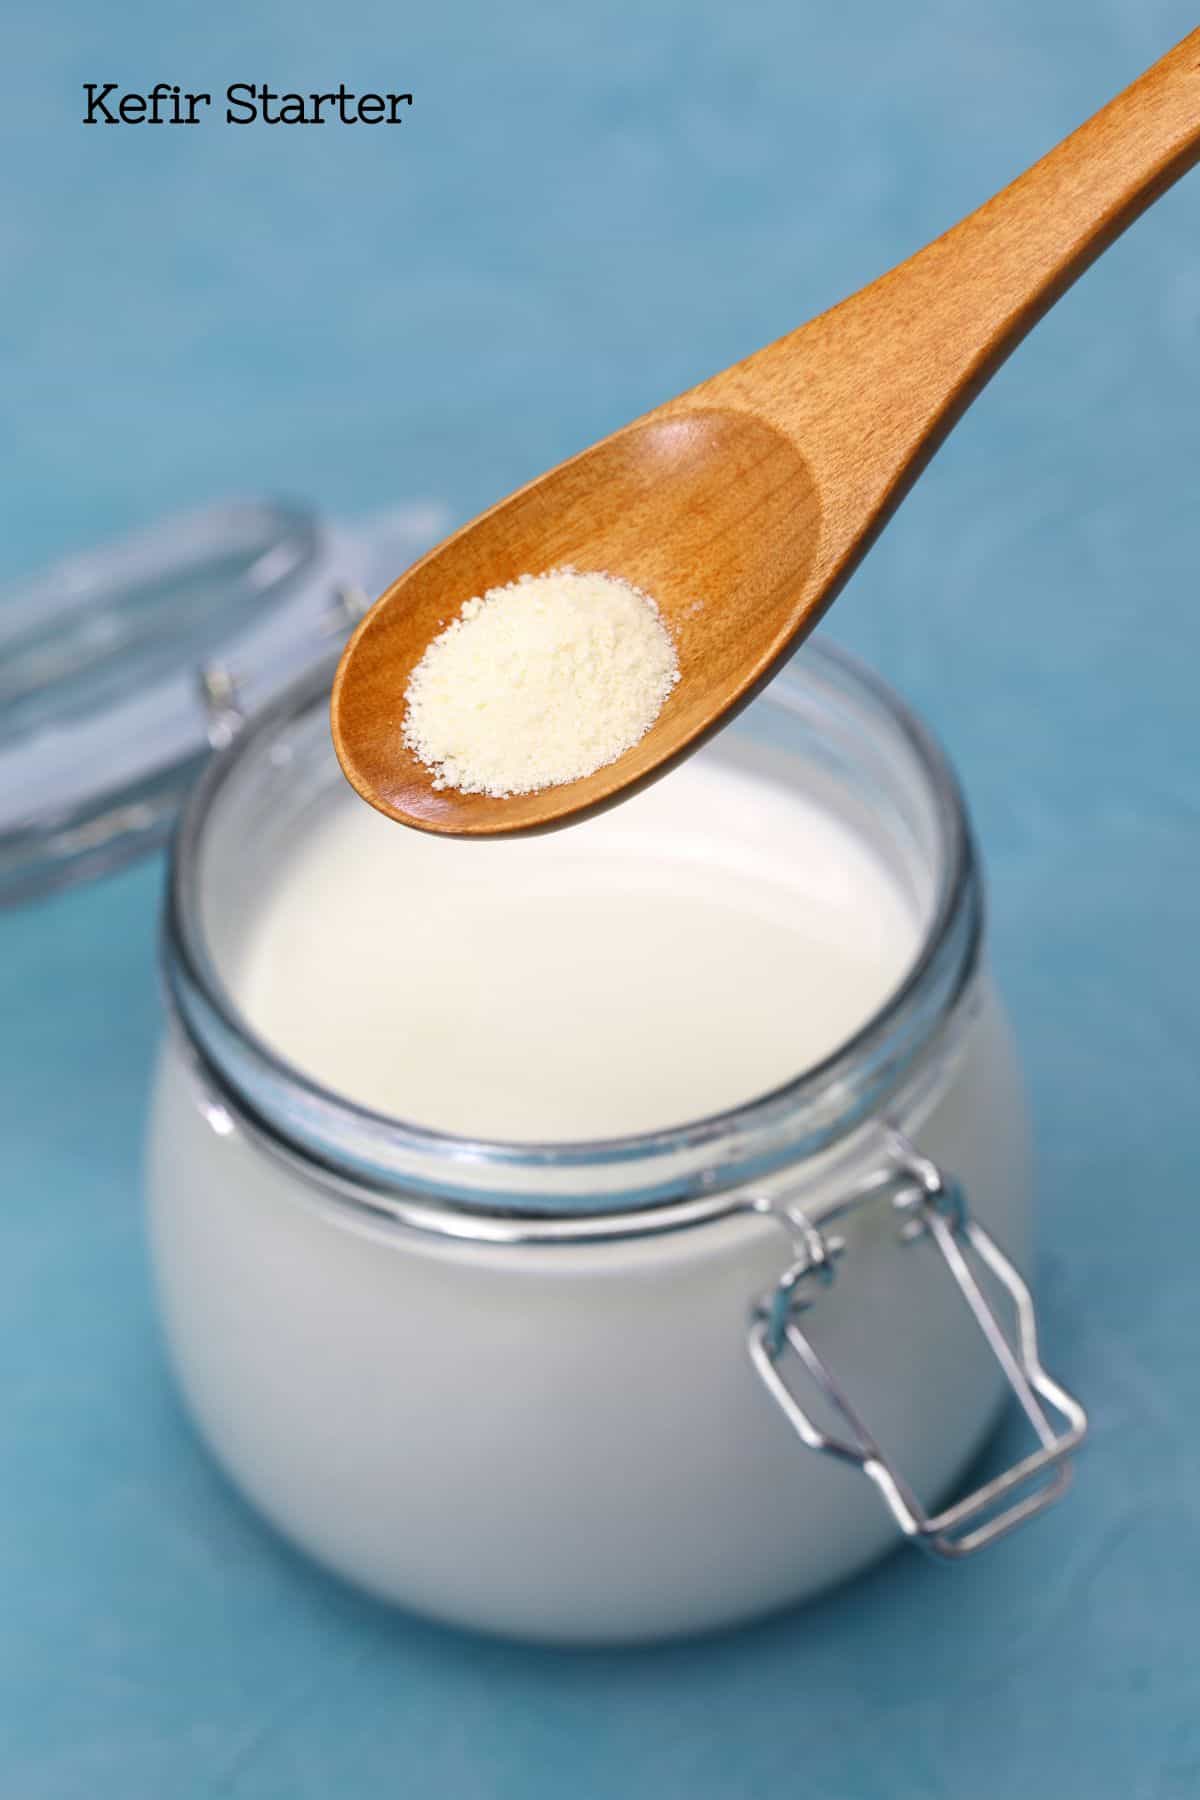 A glass jar of kefir milk with a wooden spoon above it containing powdered kefir starter.